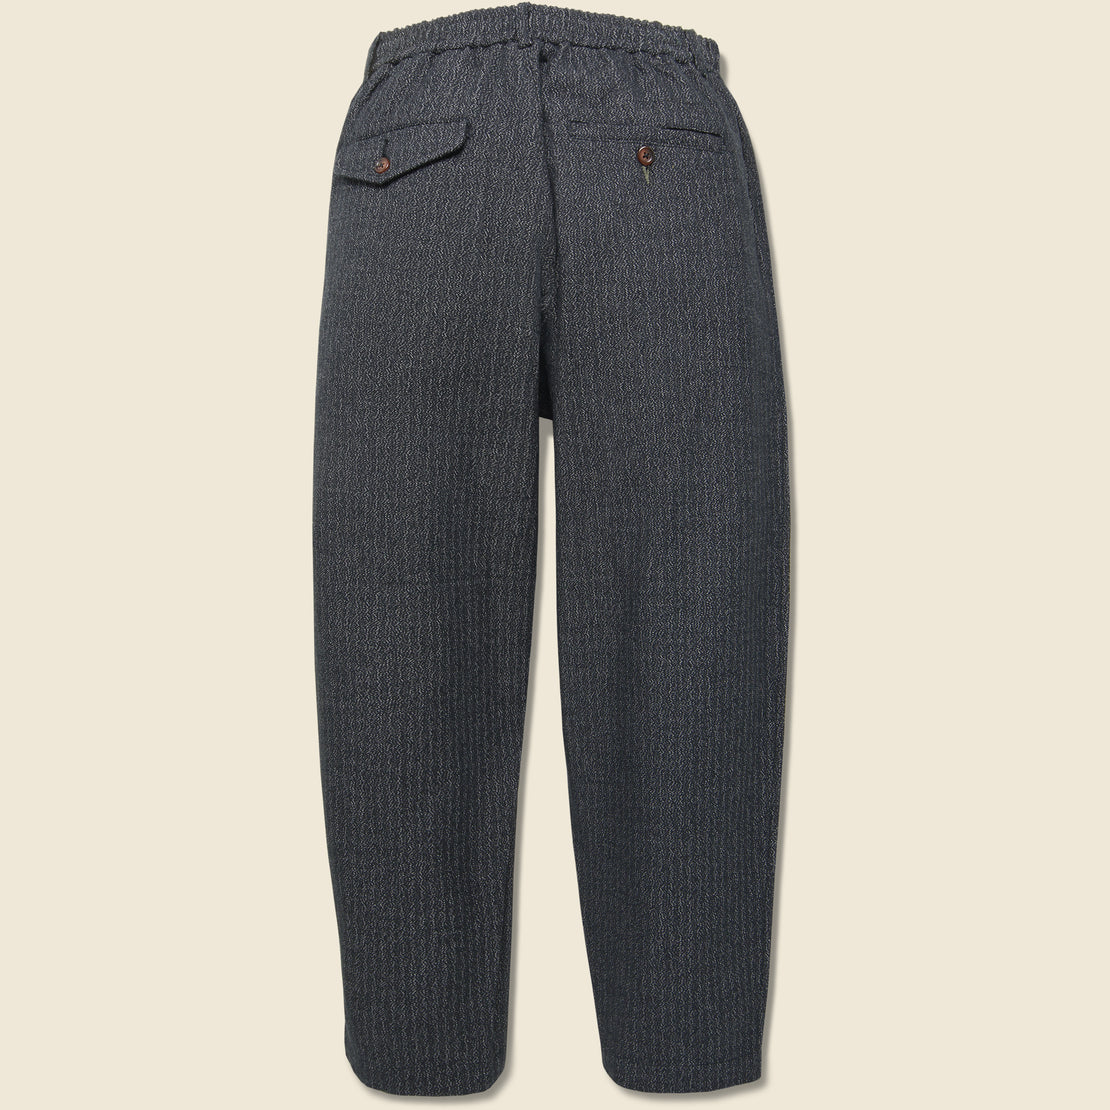 Kharma Cotton Pleated Track Pant - Black - Universal Works - STAG Provisions - Pants - Twill